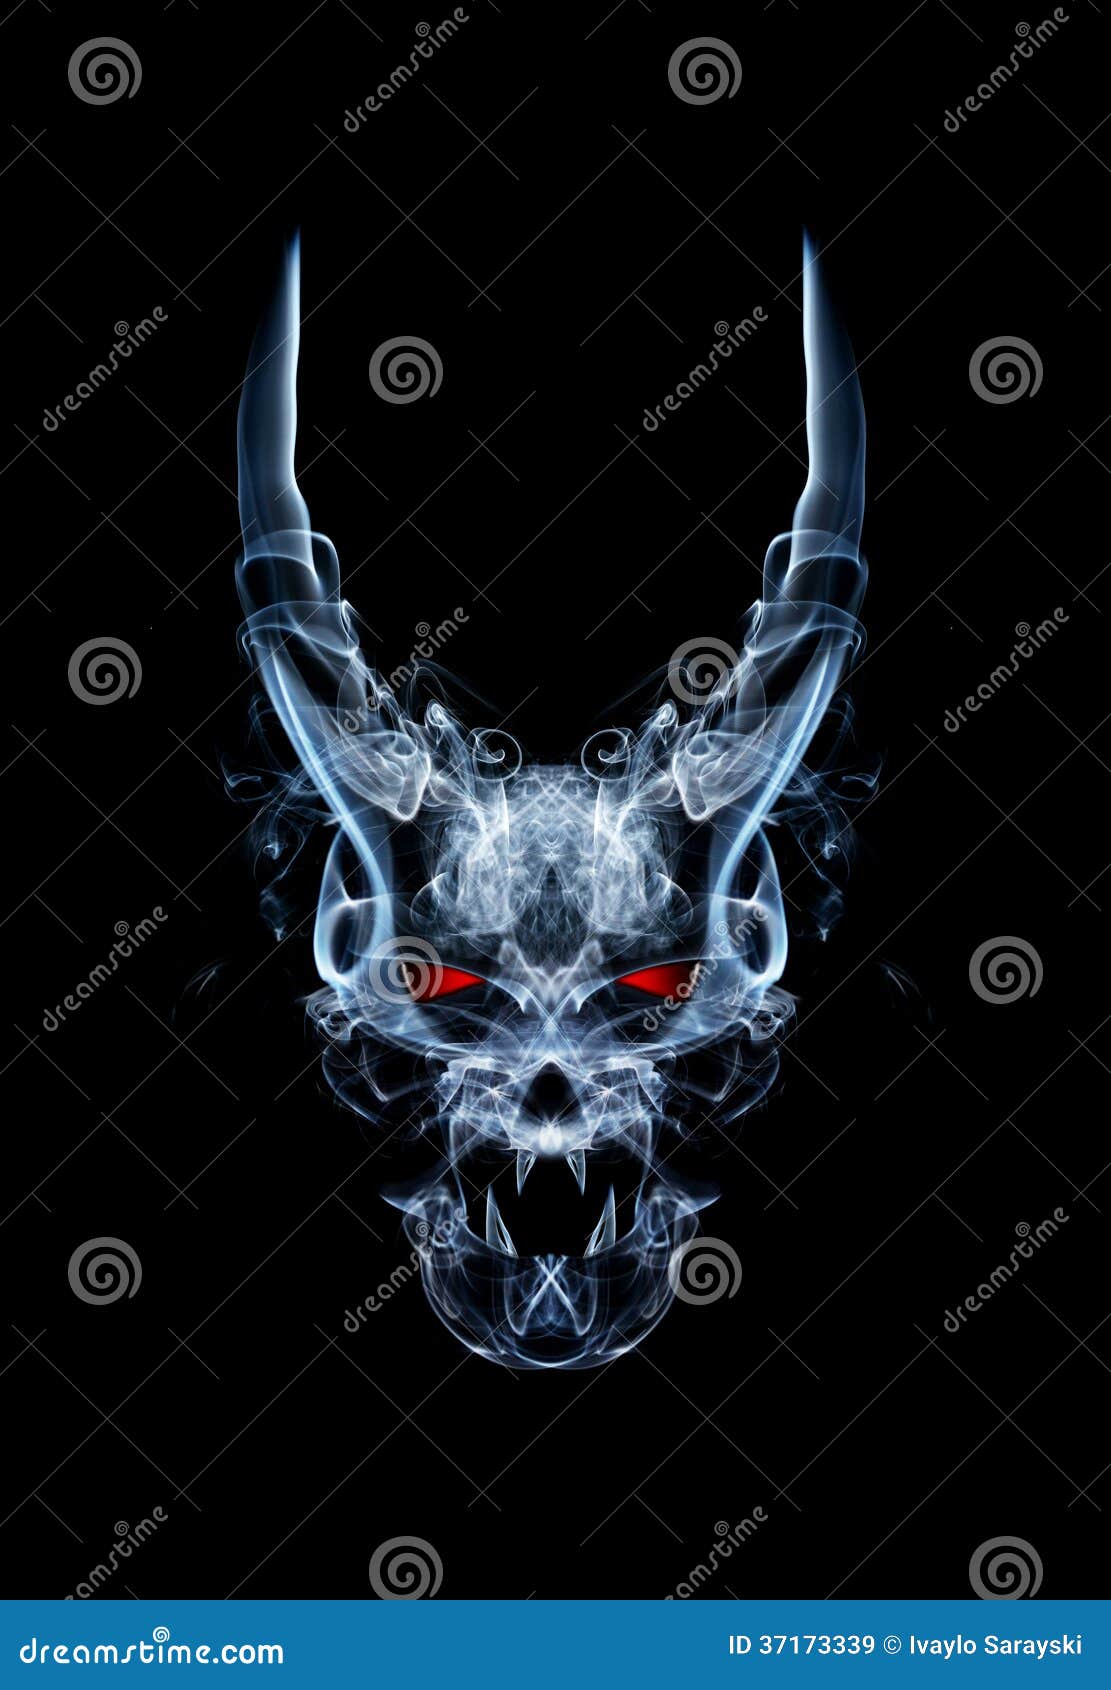 Skull with fire and smoke effect simple tattoo design black